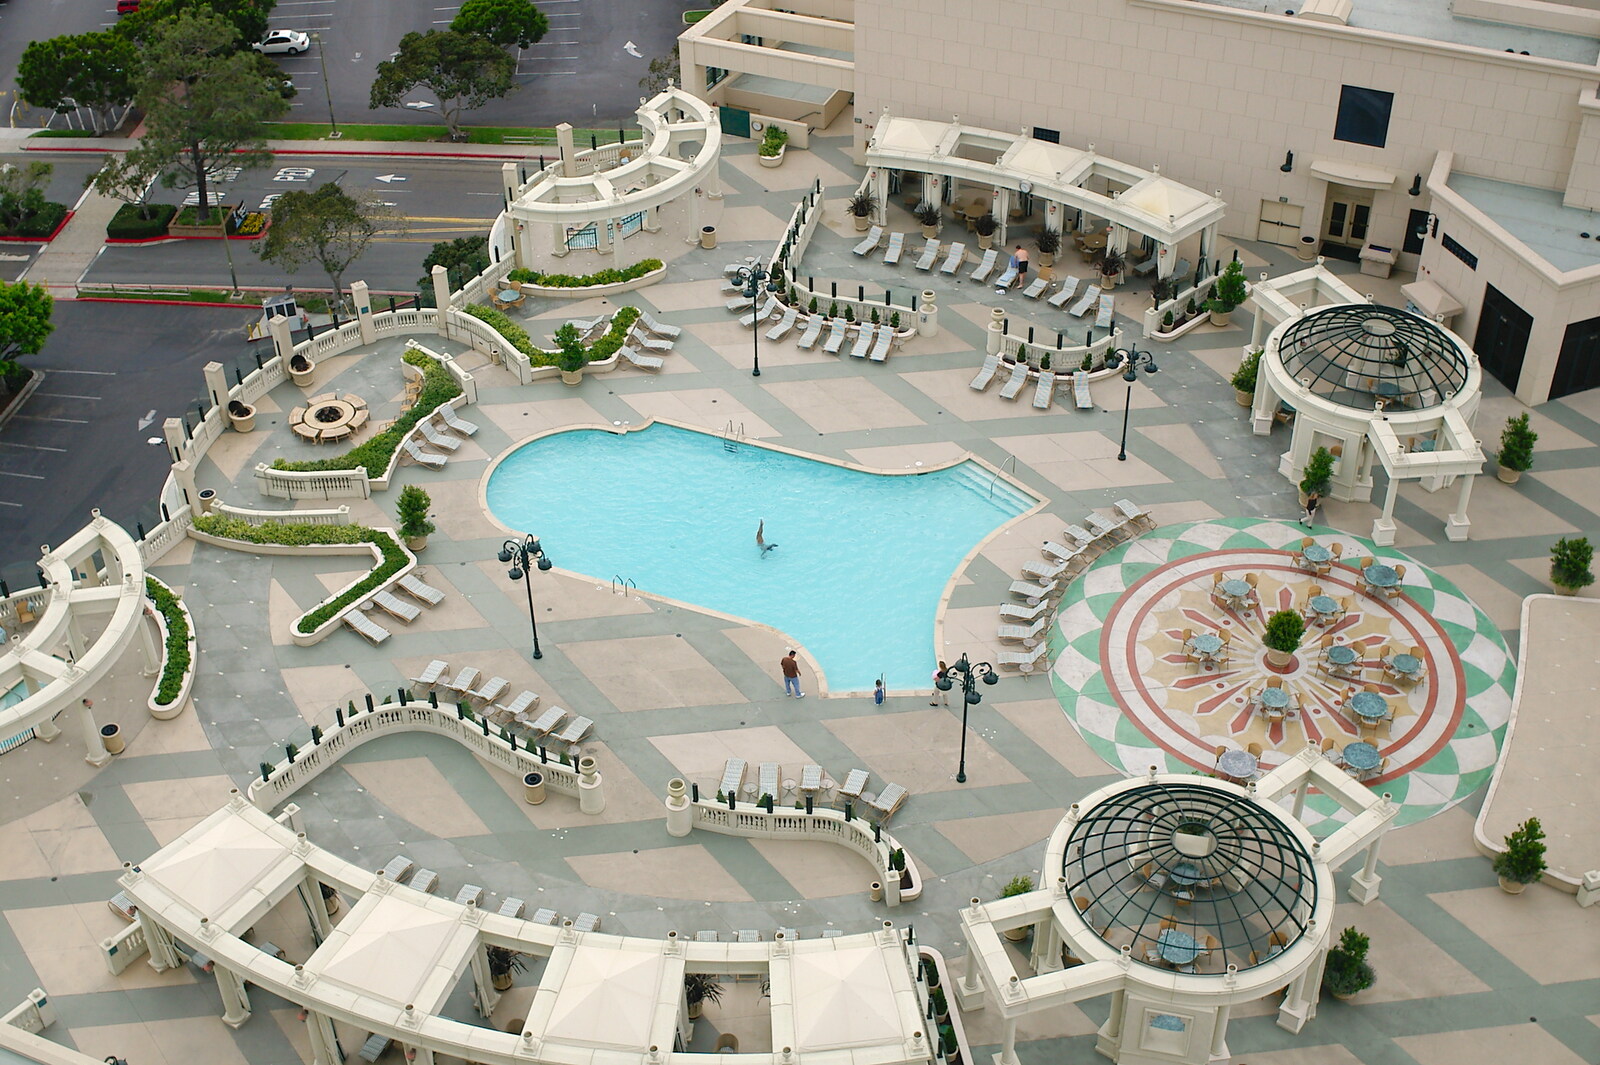 A view of the hotel swimming pool from The BREW Developers Conference, San Diego, California - 2nd June 2005